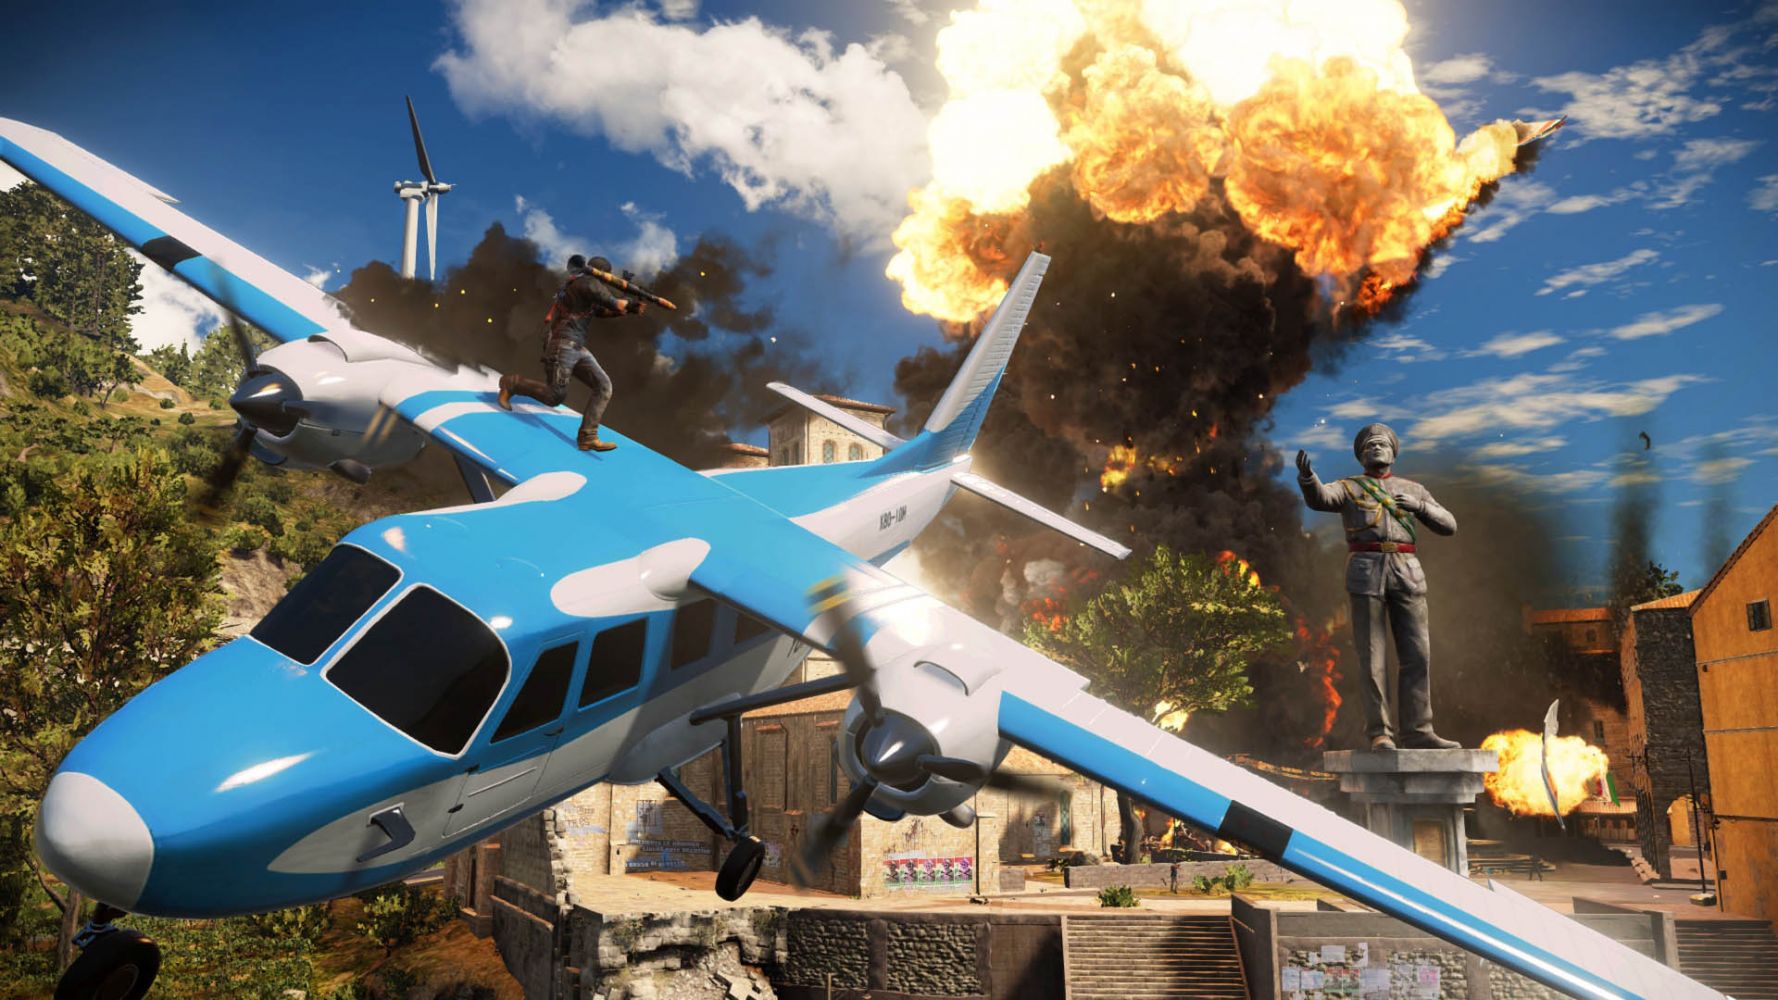 where can i buy just cause 3 for pc